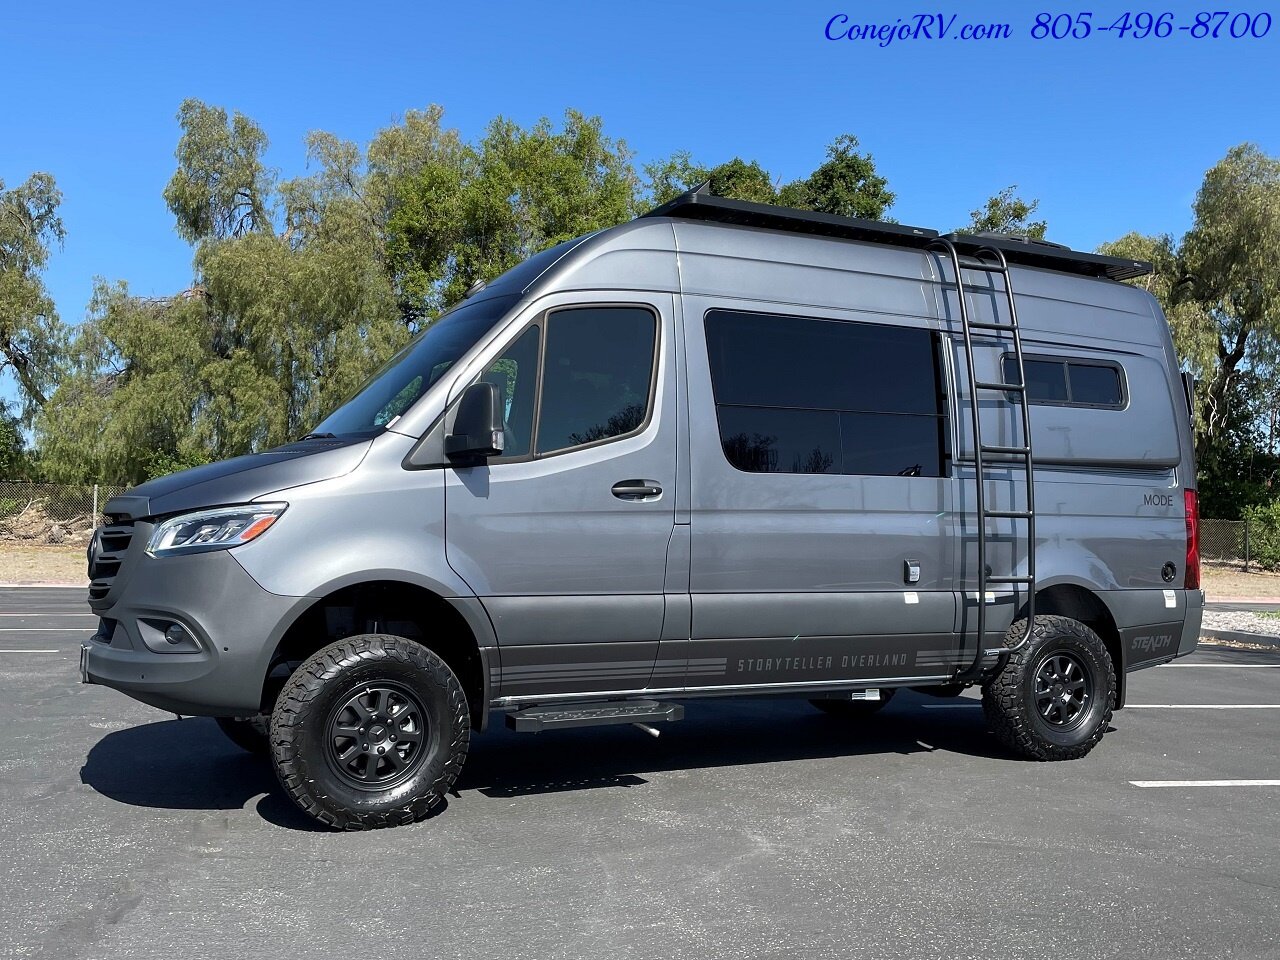 2023 Storyteller Overland Stealth Mode AWD DEALER DEMO 4 cyl H.O.with 9 Speed  Transmission - Photo 1 - Thousand Oaks, CA 91360